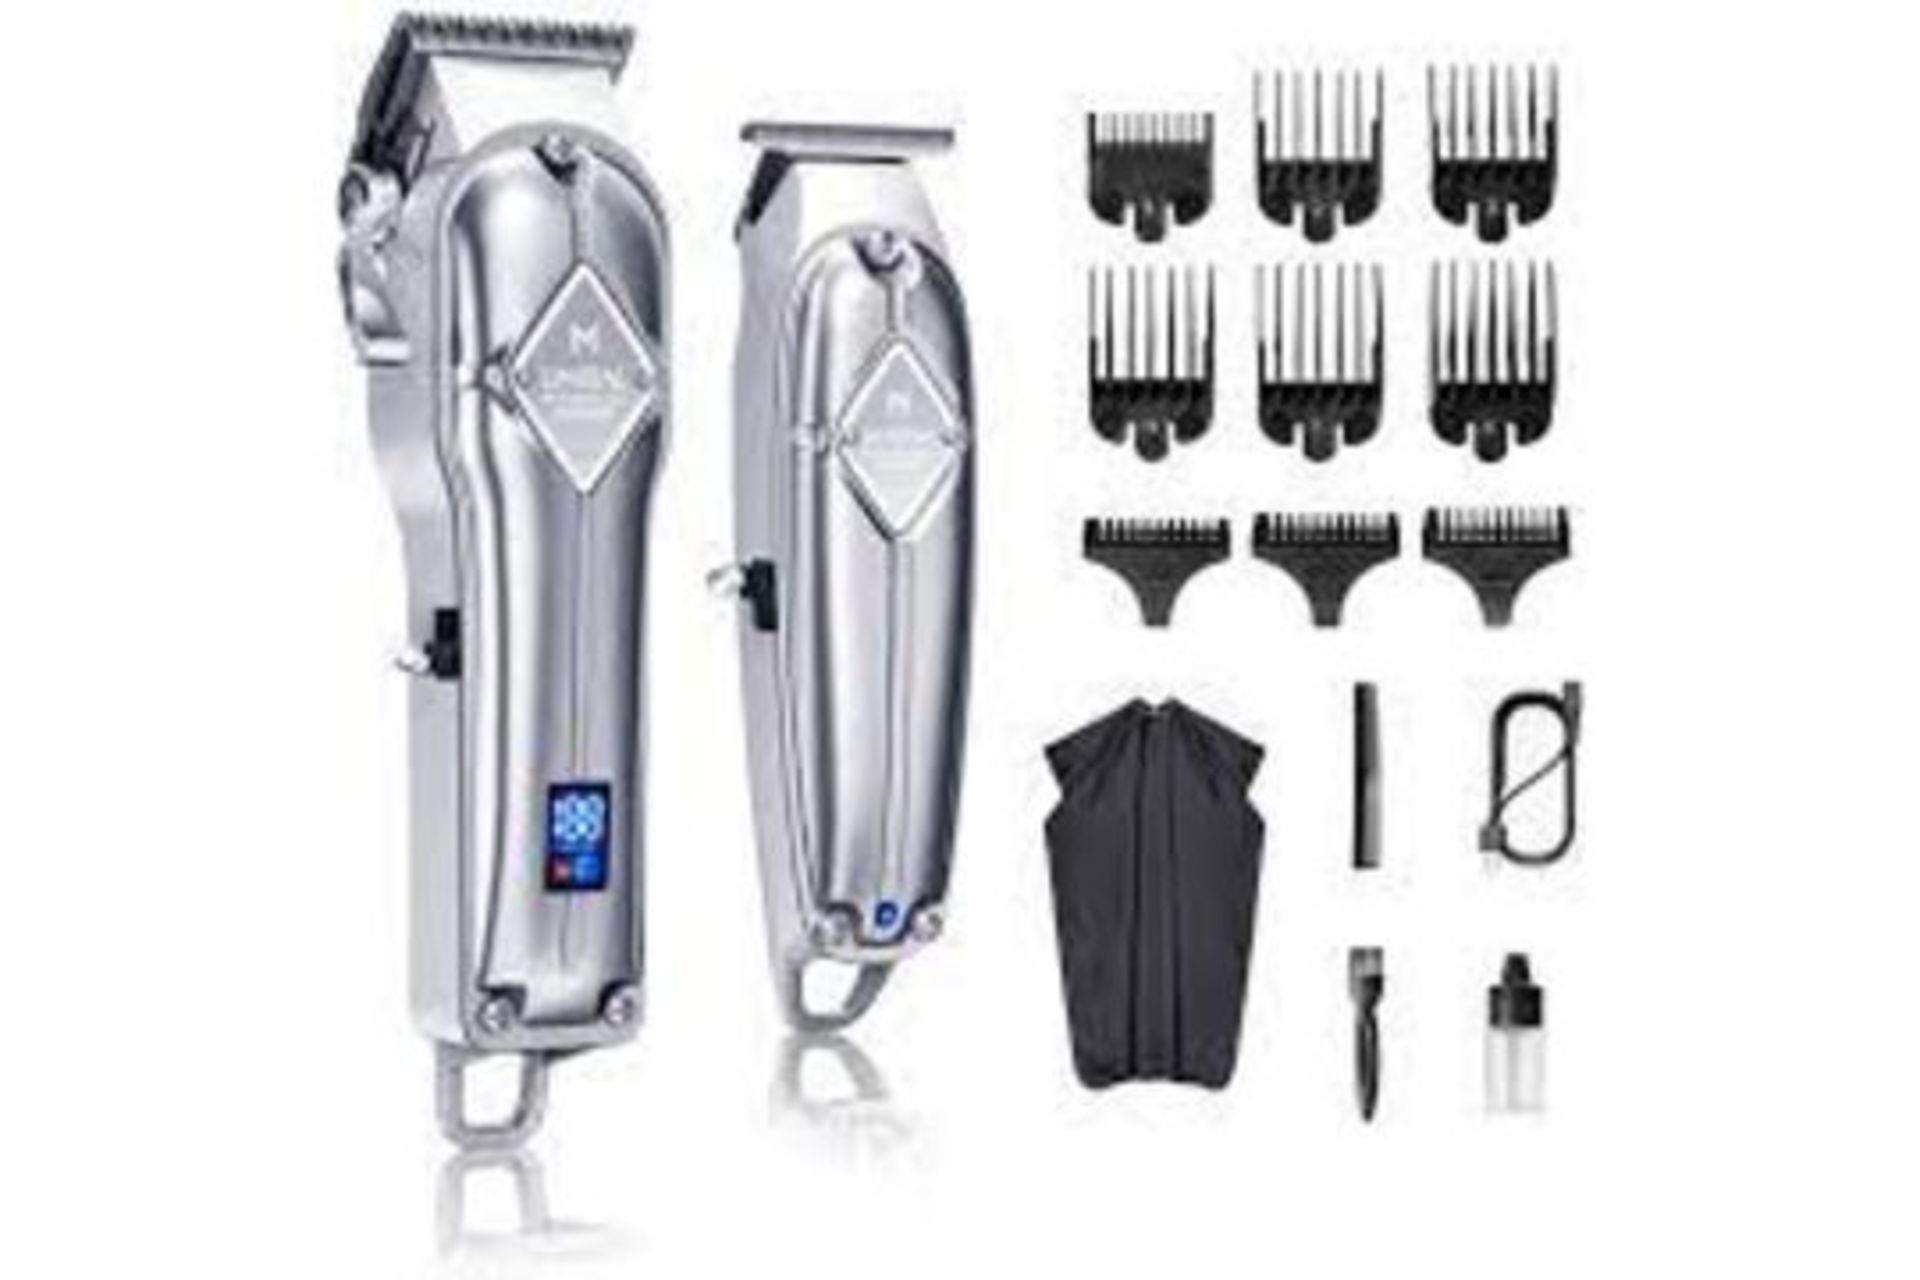 3 X BRAND NEW LIMURAL 2 PIECE PROFESSIONAL BEARD TRIMMER SETS OFF